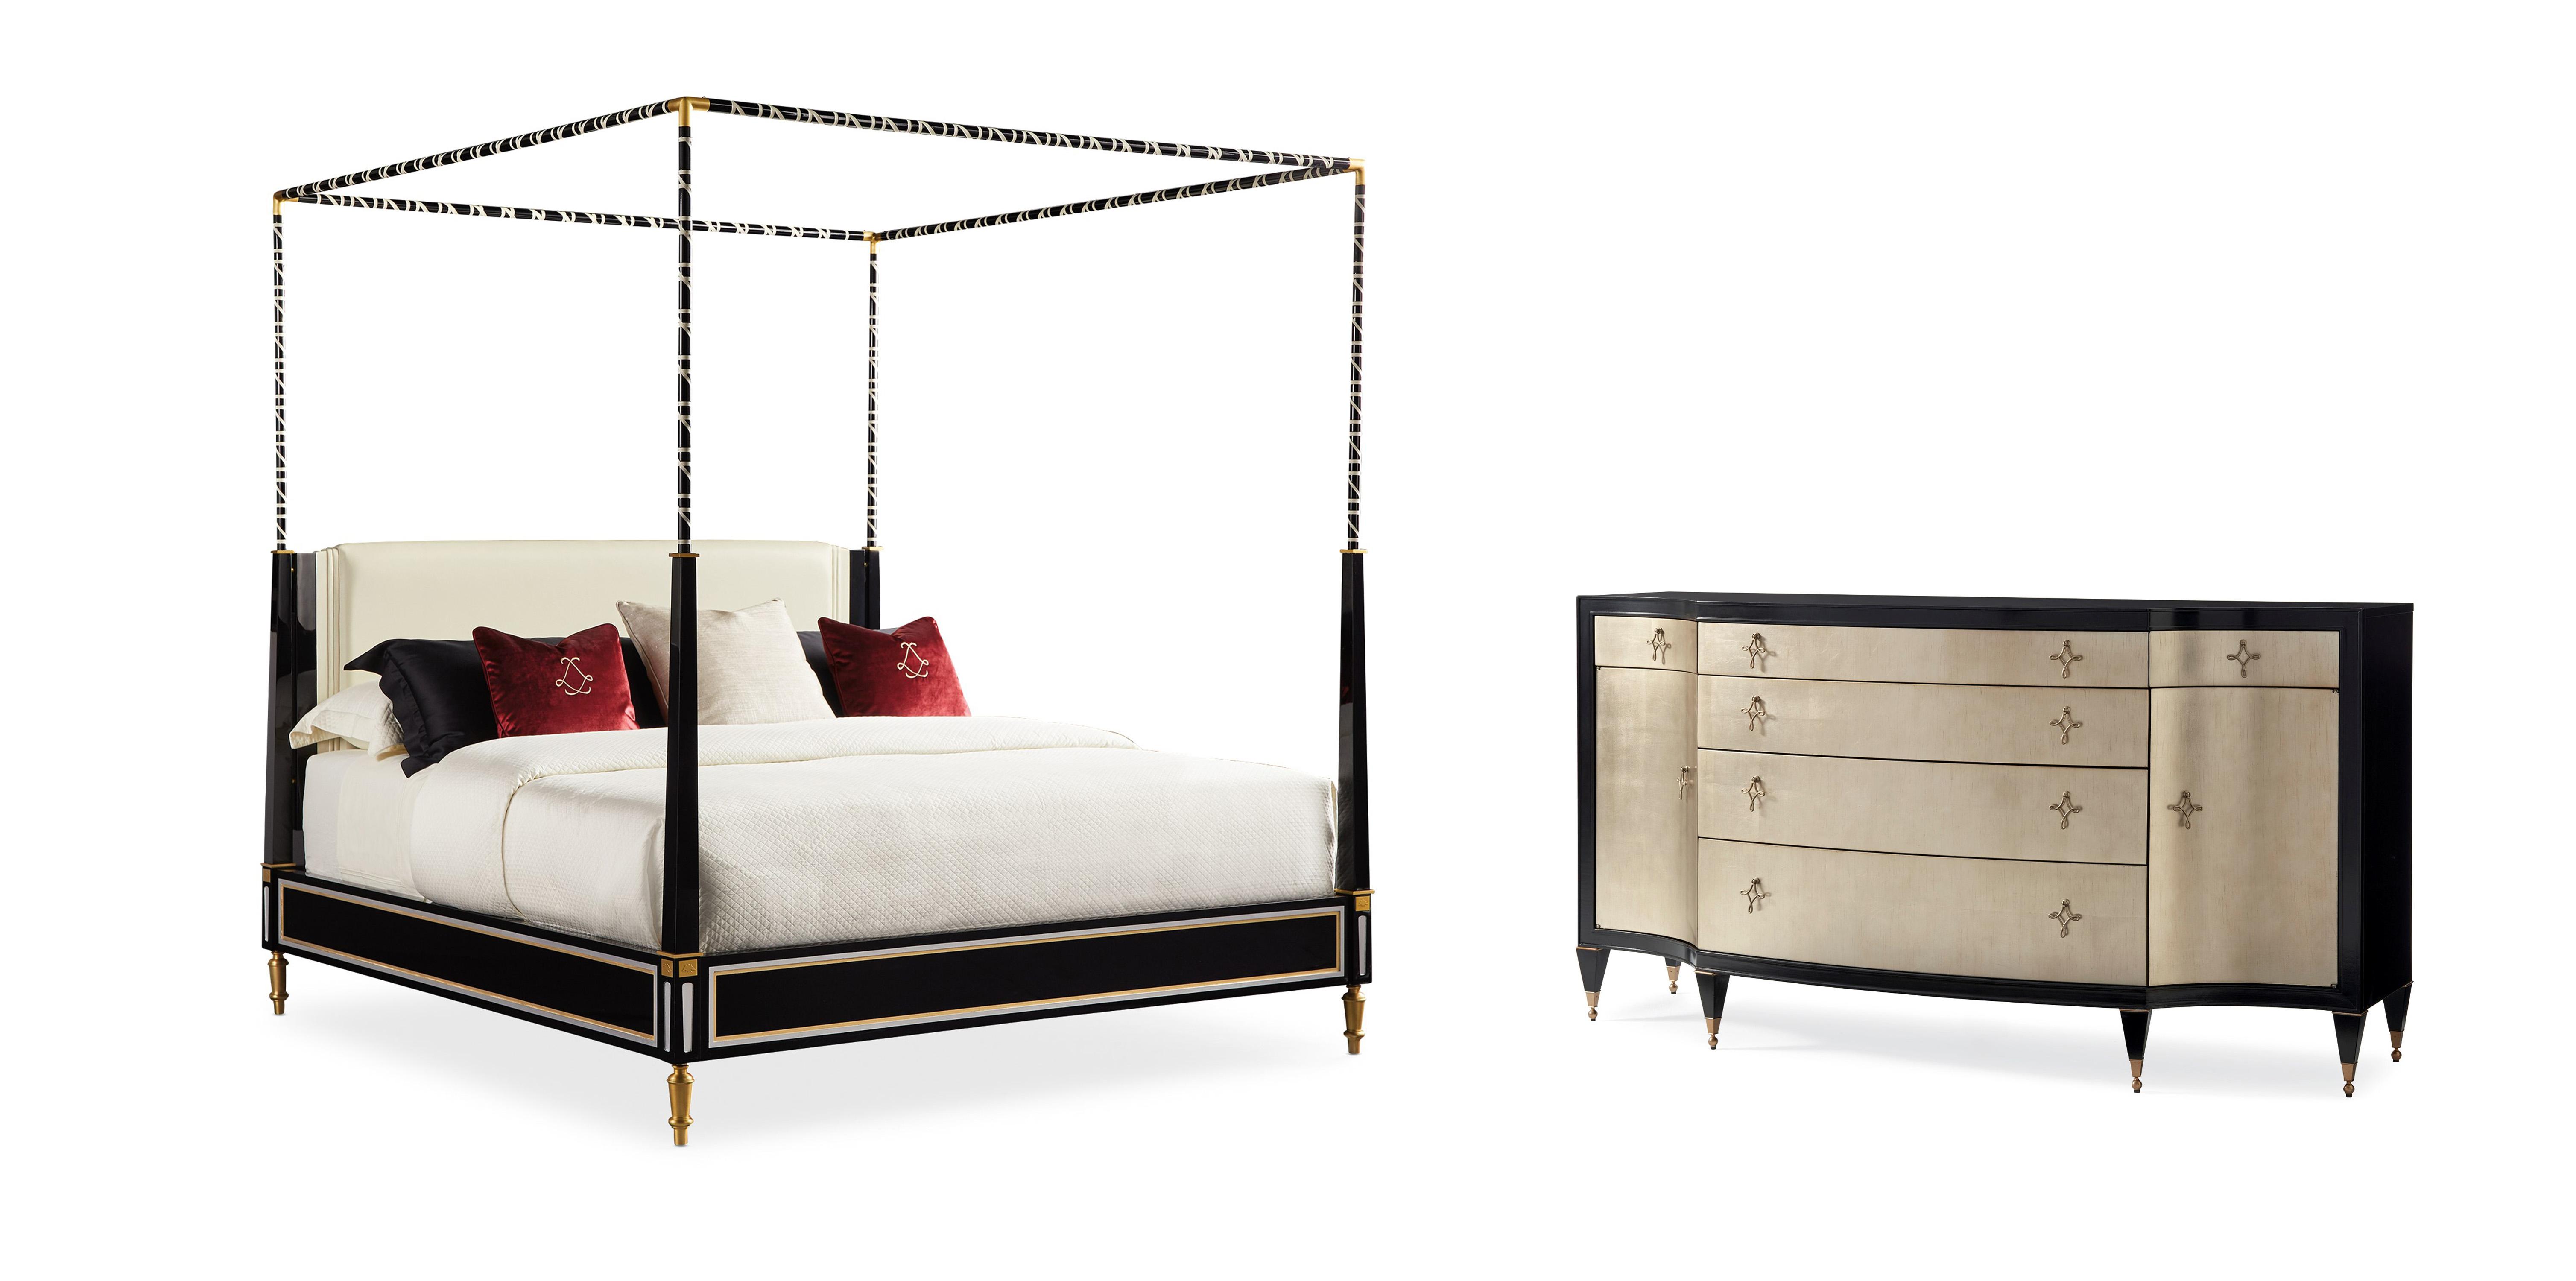 

    
Creme Leather & Black Lacquer Finish King Size Bed Set 2Pcs THE COUTURIER CANOPY BED / OPPOSITES ATTRACT by Caracole
